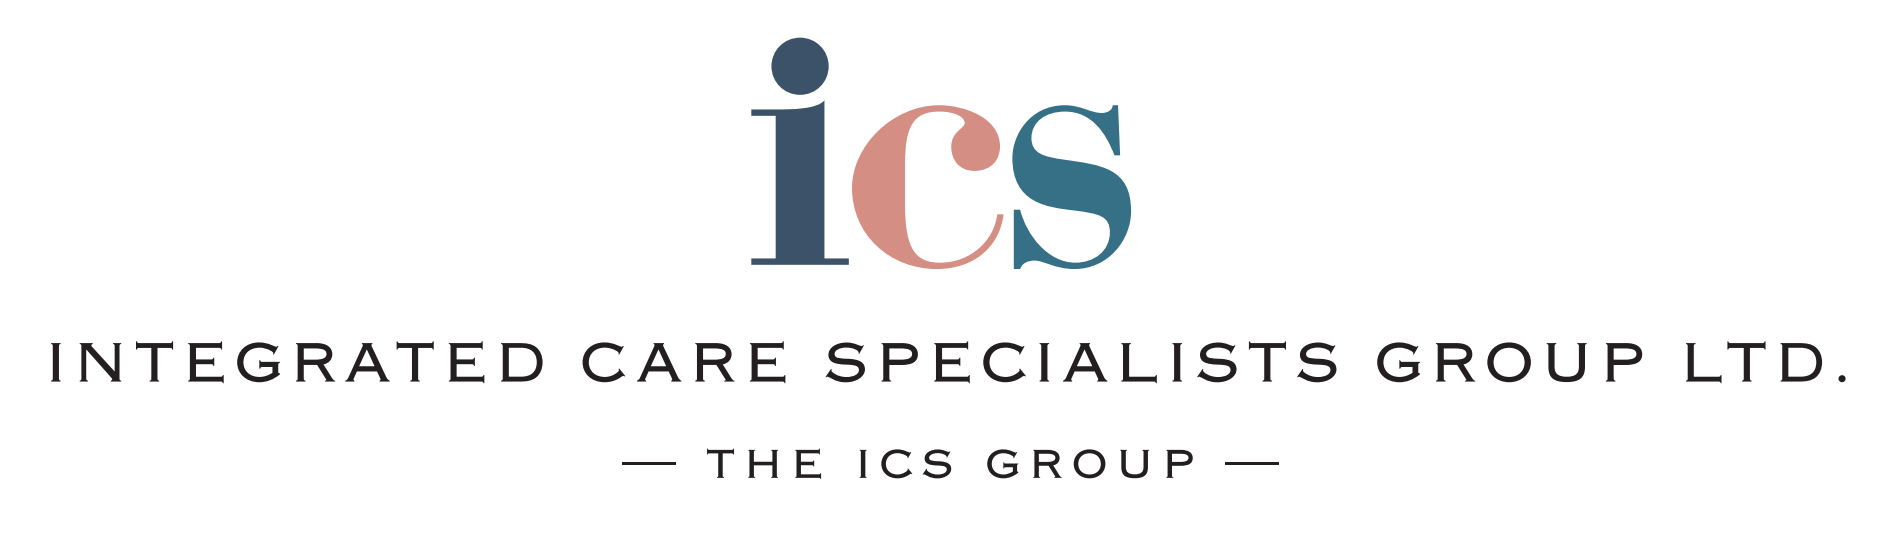 Integrated Care Specialists Group Ltd.